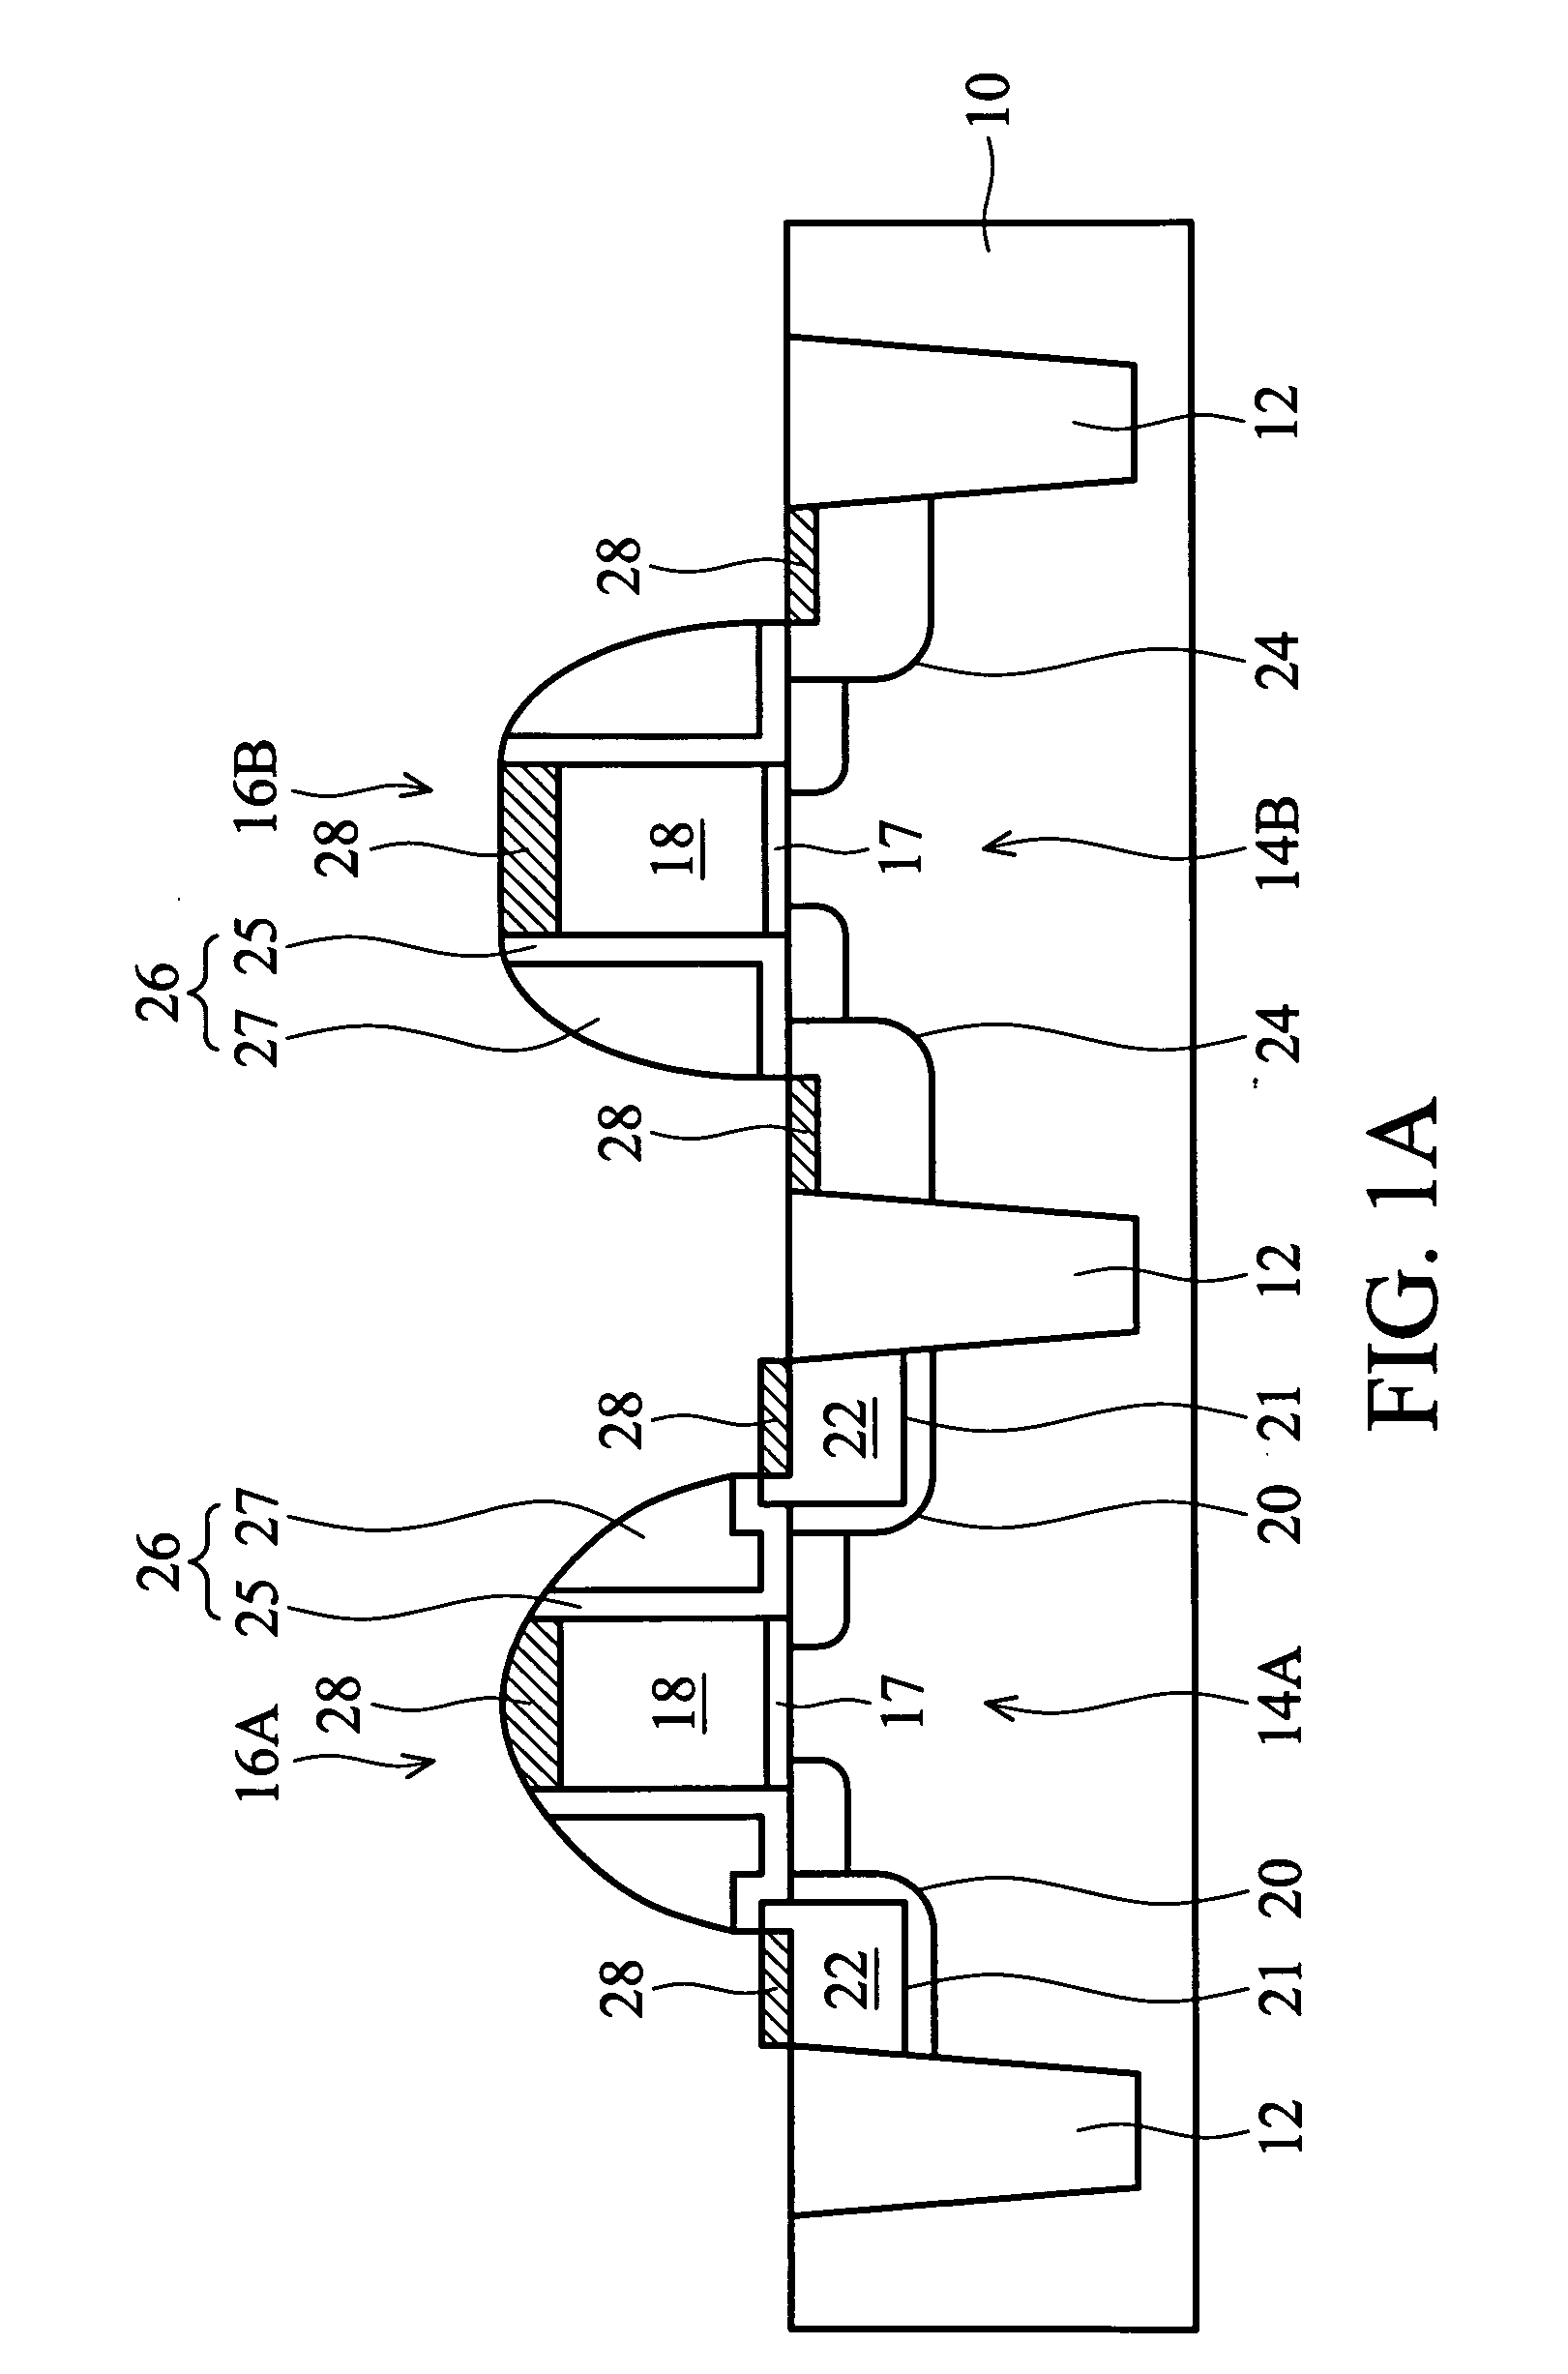 Strain enhanced CMOS architecture with amorphous carbon film and fabrication method of forming the same